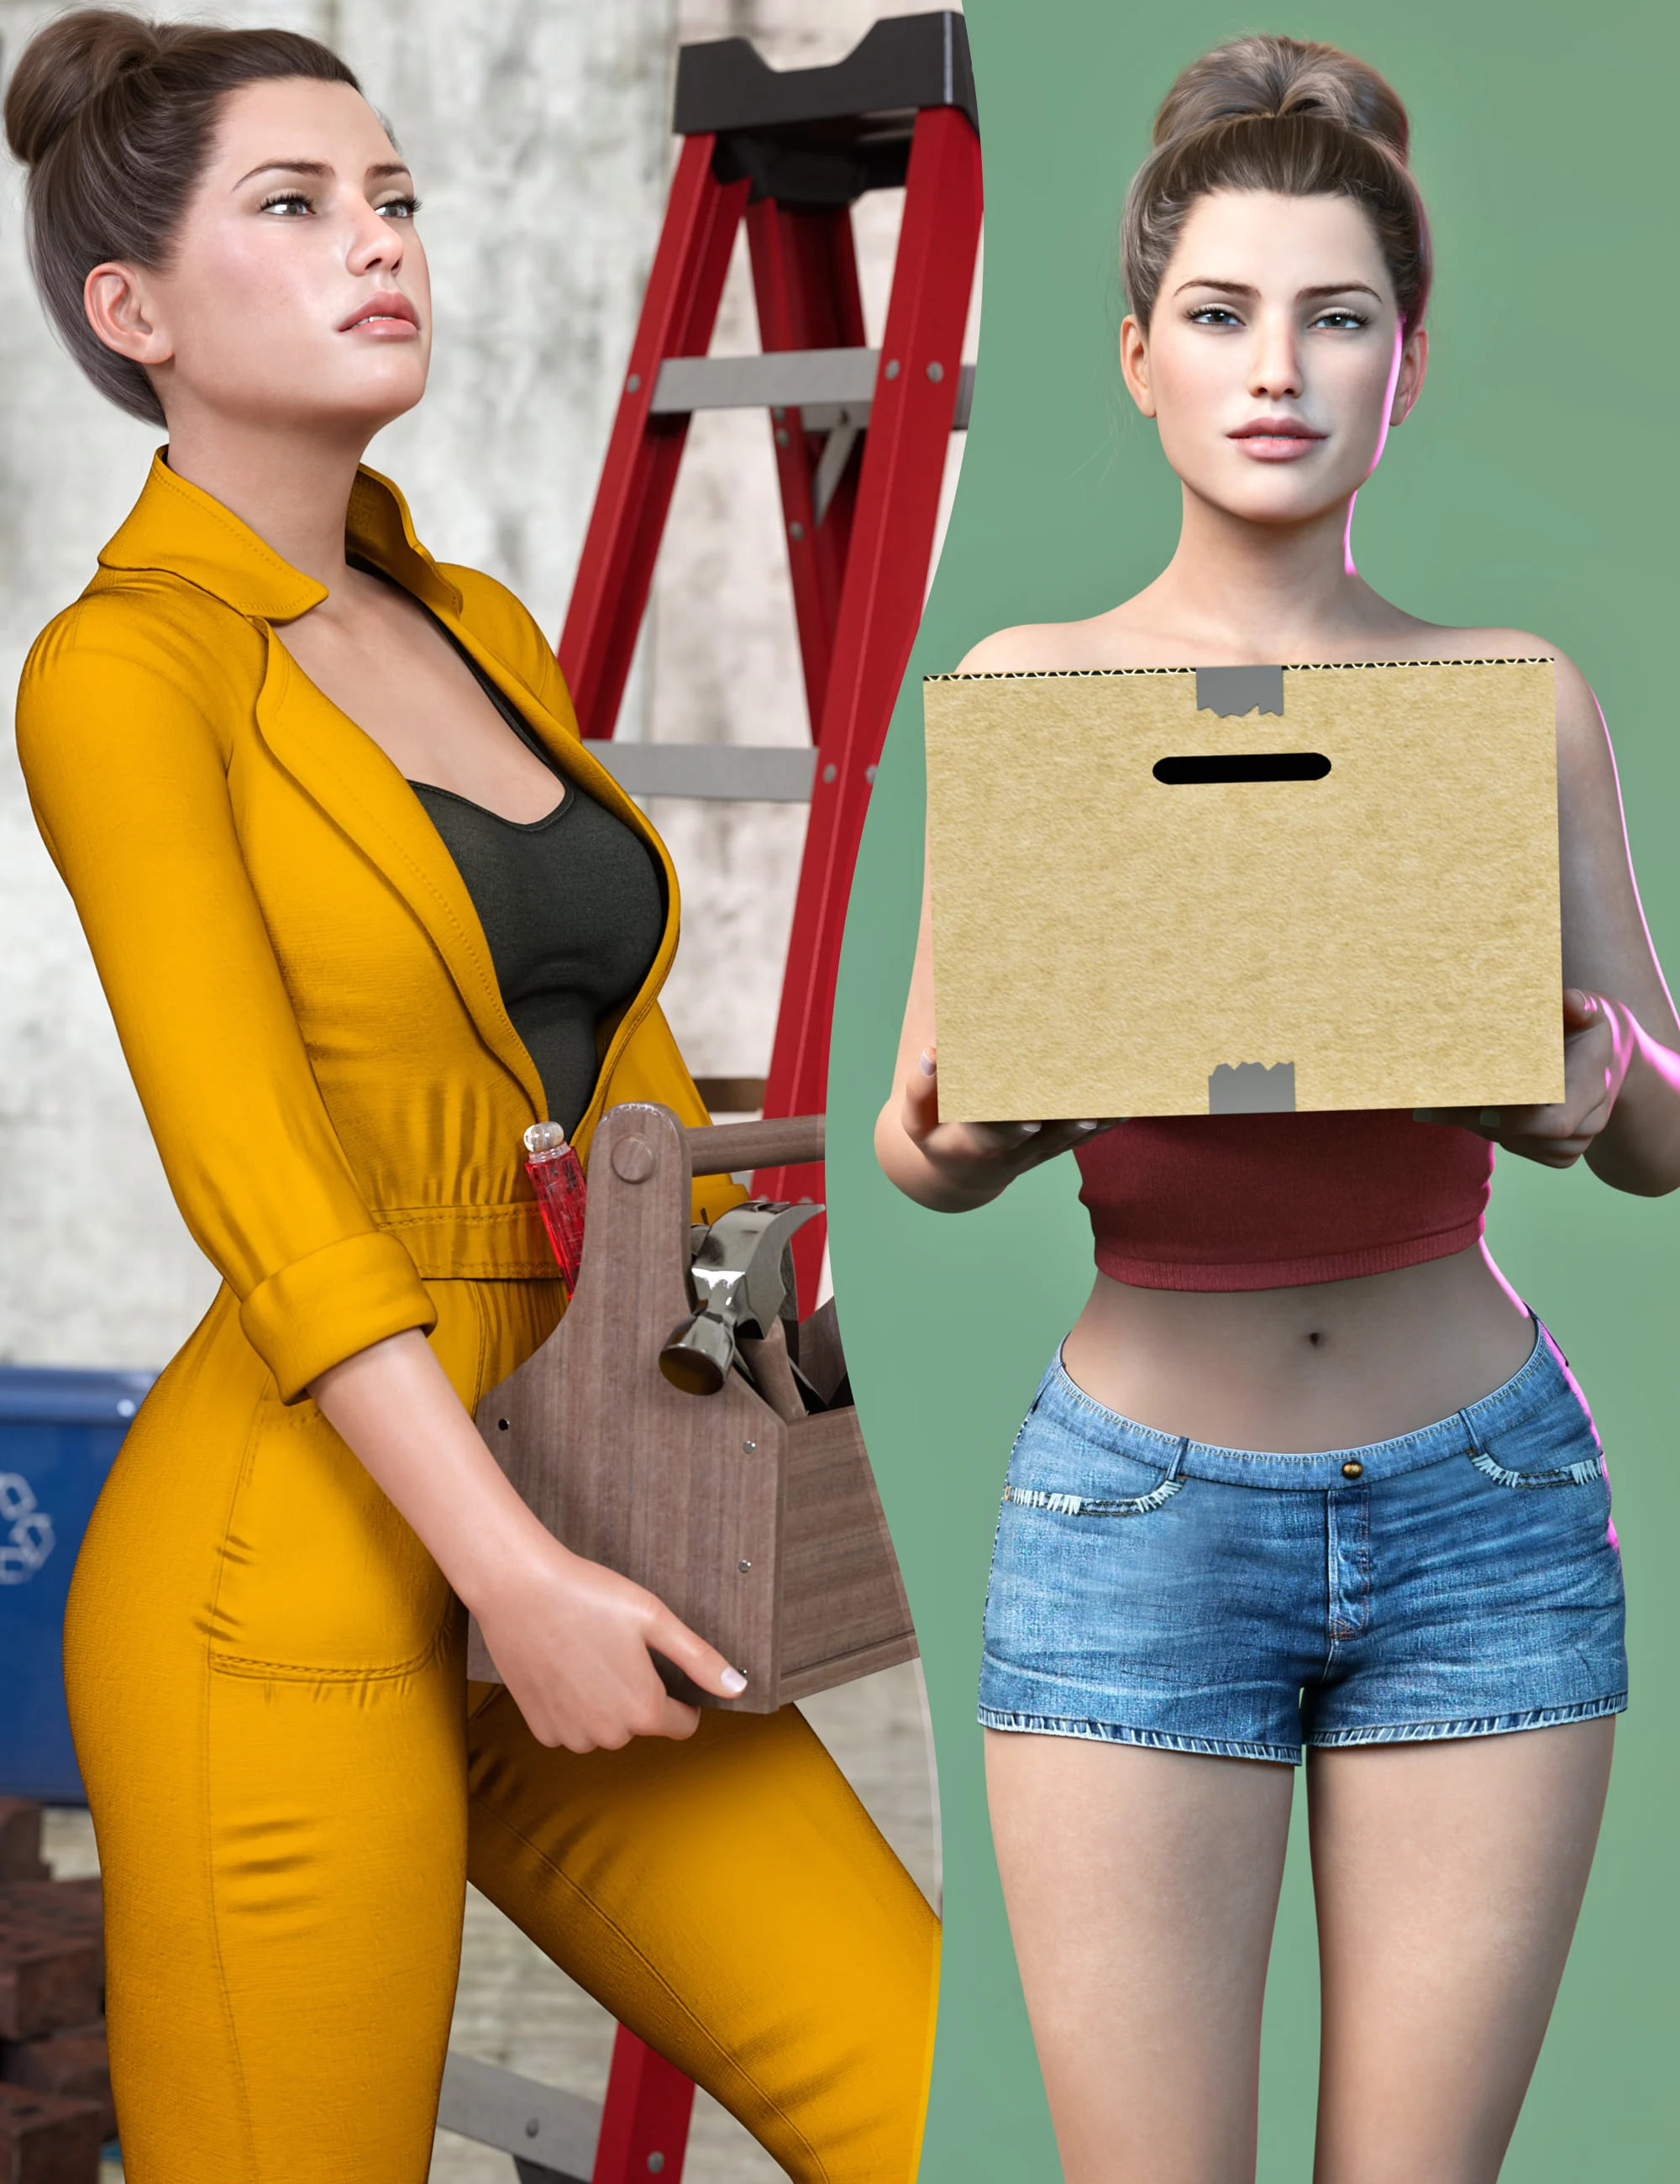 Z Lifting and Carrying Utility Pose Collection for Genesis 8 and 8.1_DAZ3D下载站